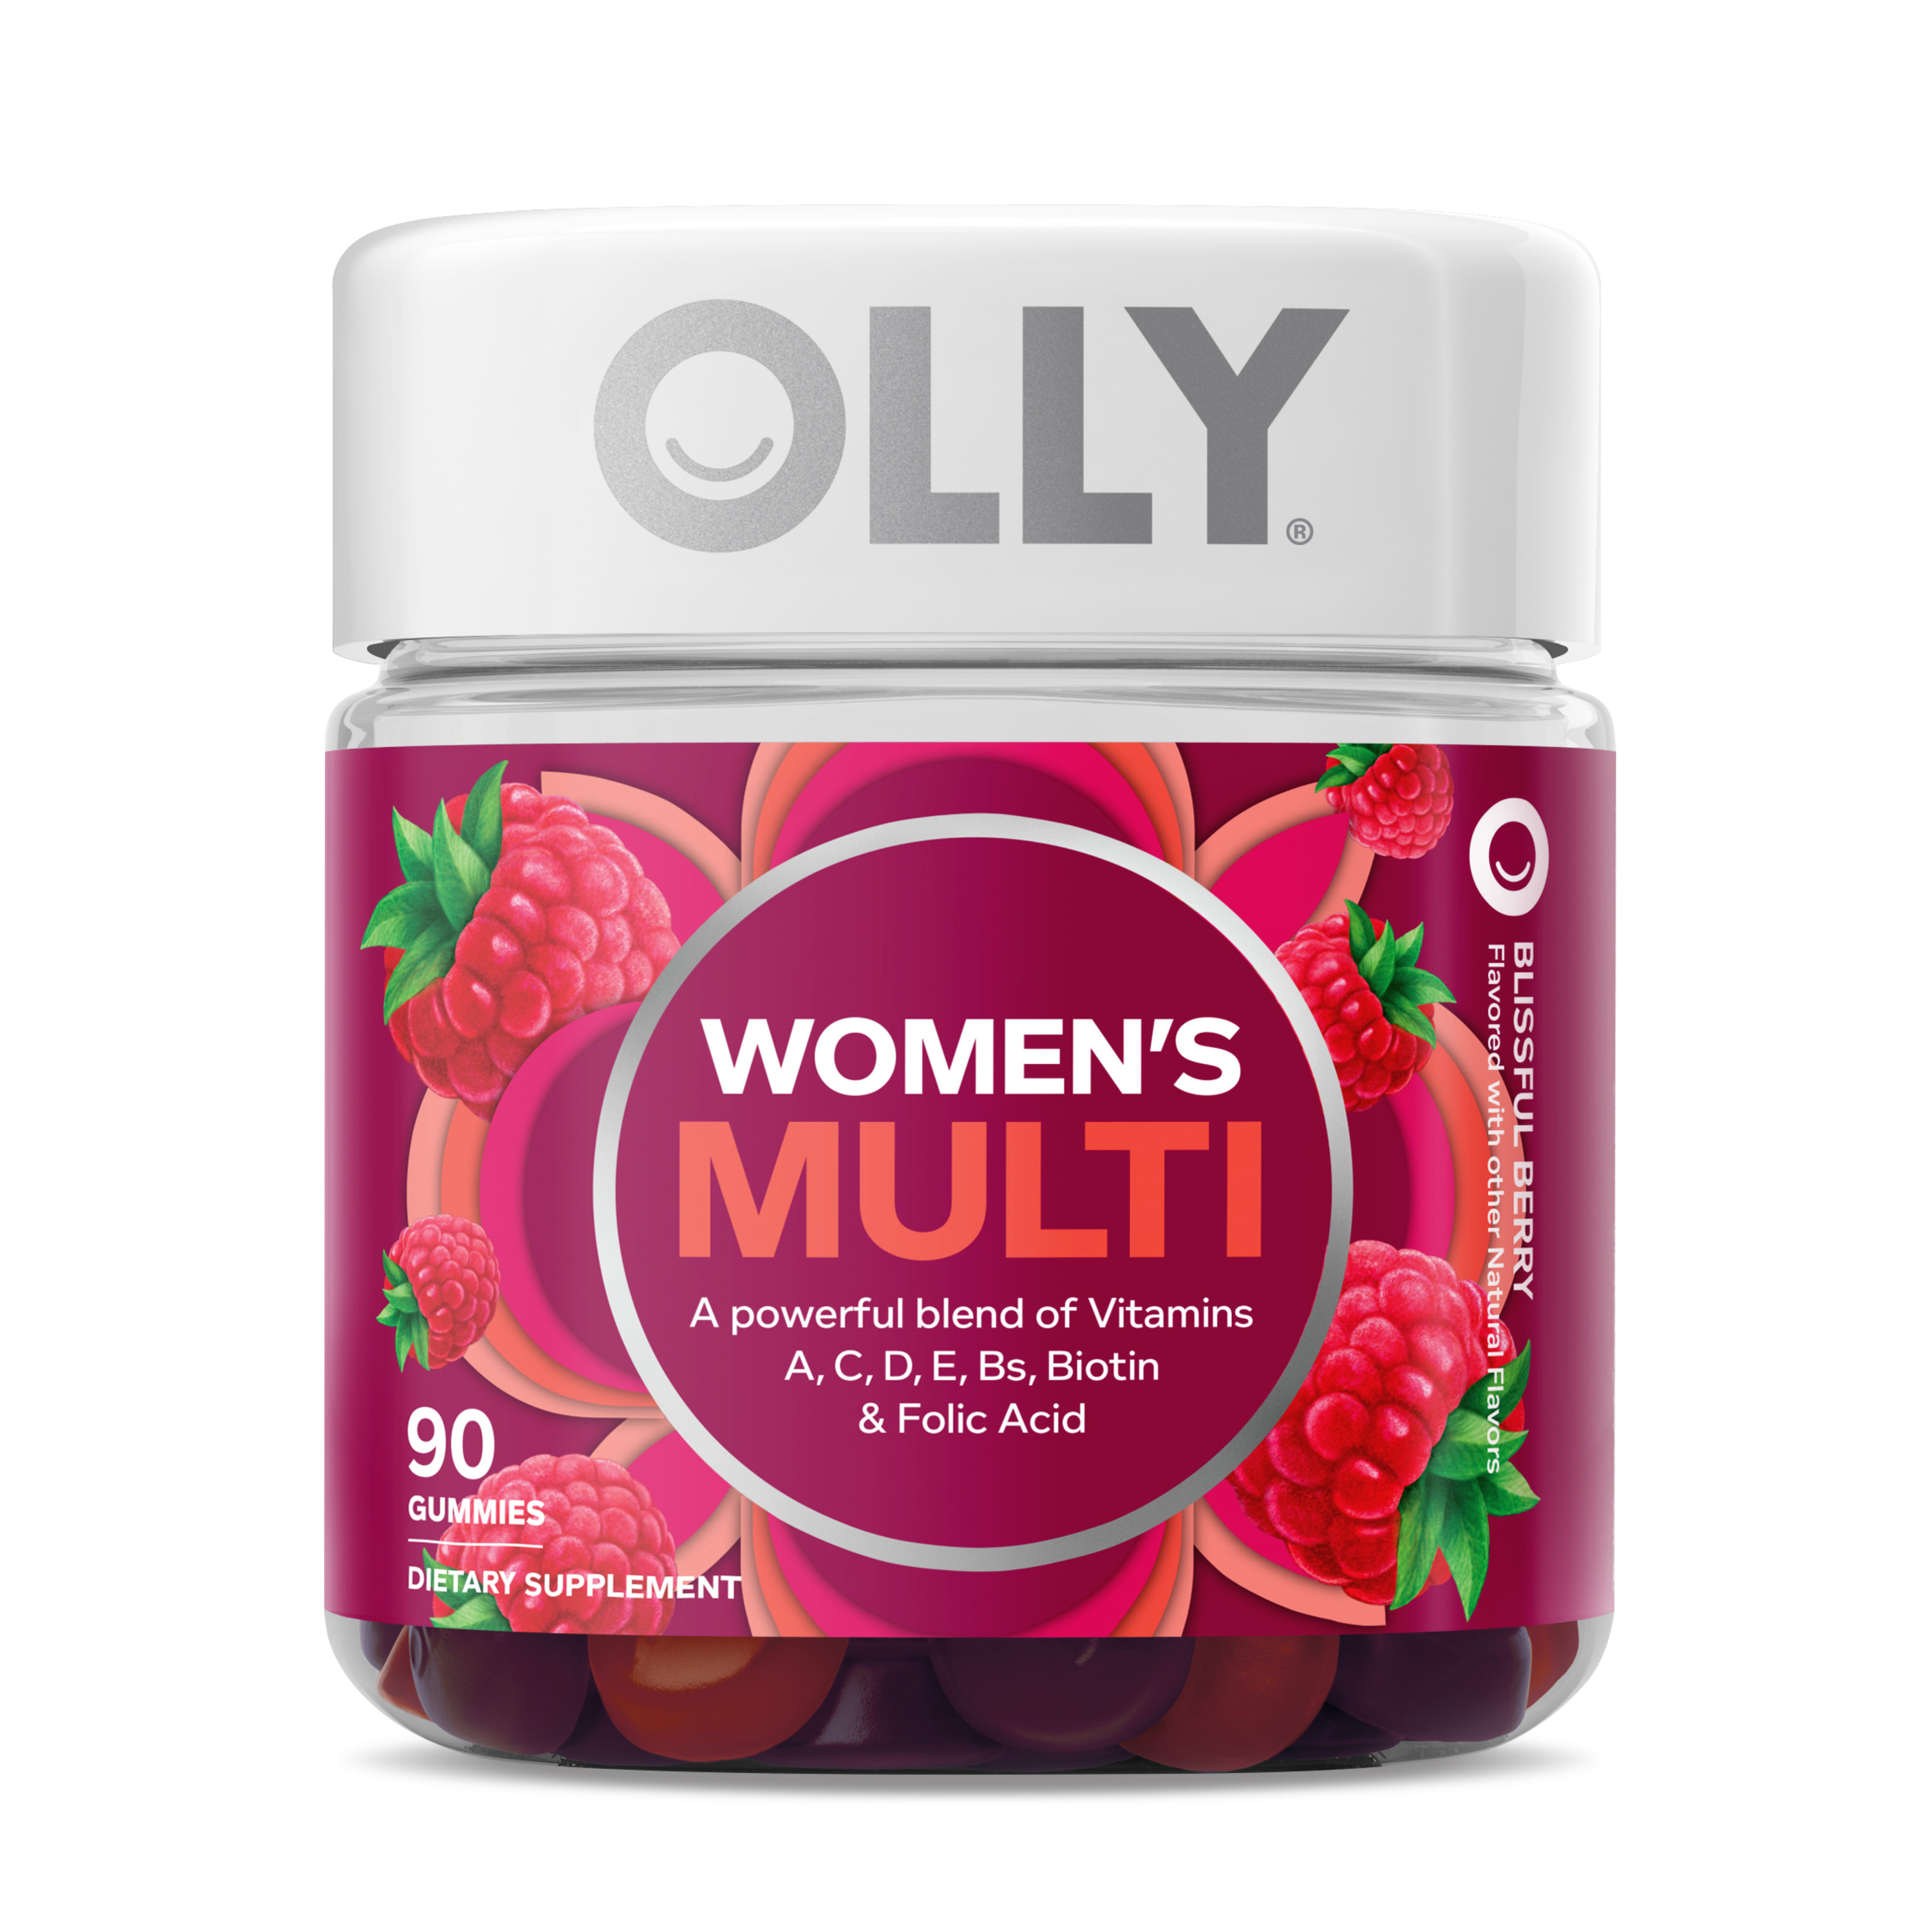 OLLY Women's Daily Multivitamin Gummy, Health & Immune Support, Berry, 90 Ct - image 1 of 11